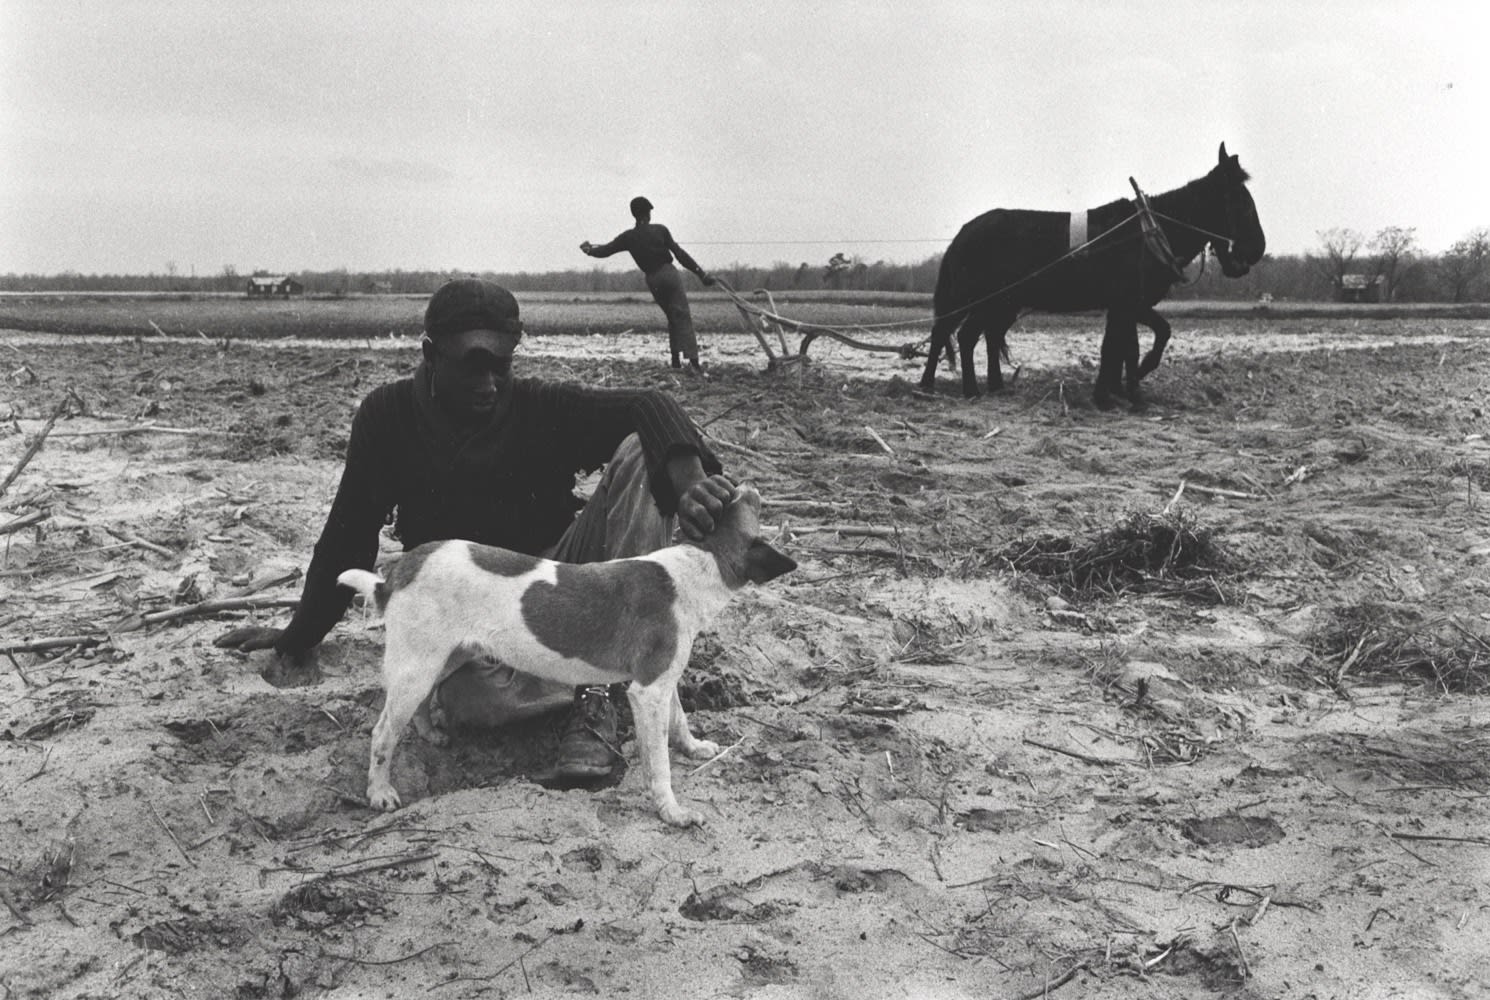 Constantine Manos, Untitled, Sharecroppers, South Carolina (2 men a dog and a plow mule), 1965